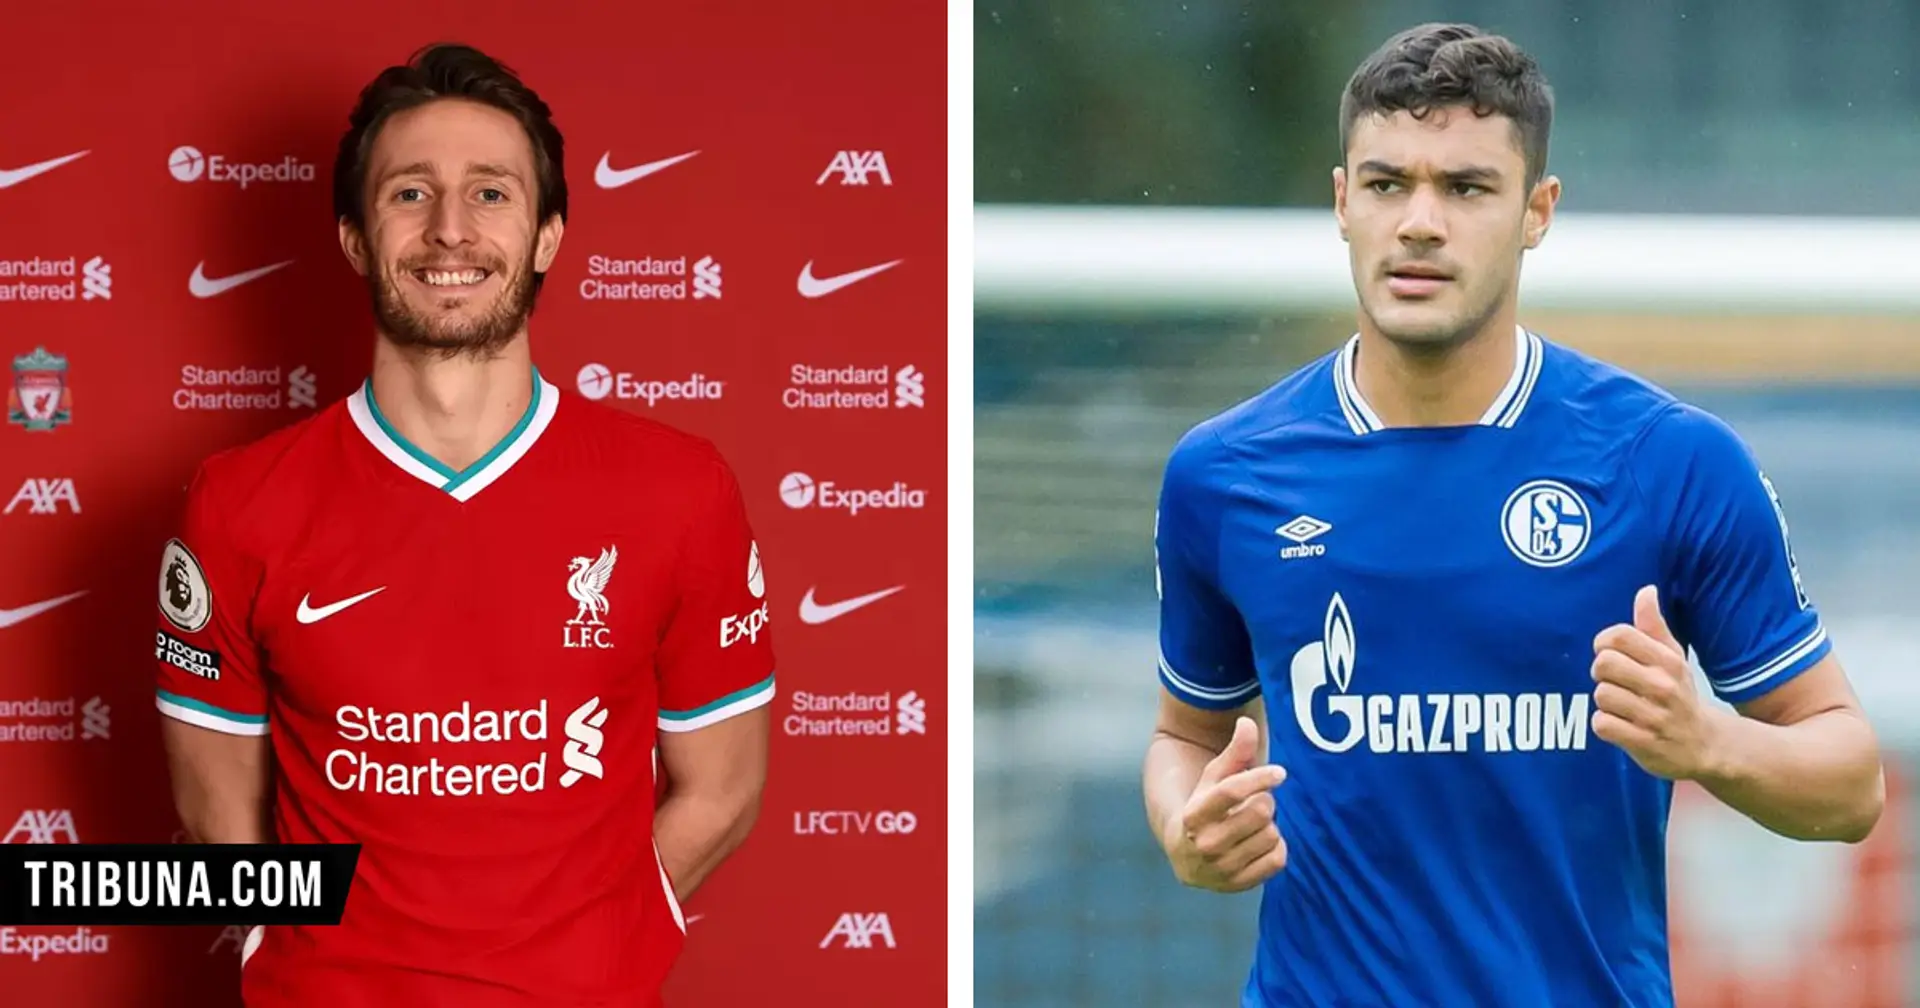 'Think we've found next Maldini in Davies'; 'Klopp will mould Kabak into respectable CB': Global Liverpool community react to Reds' January business